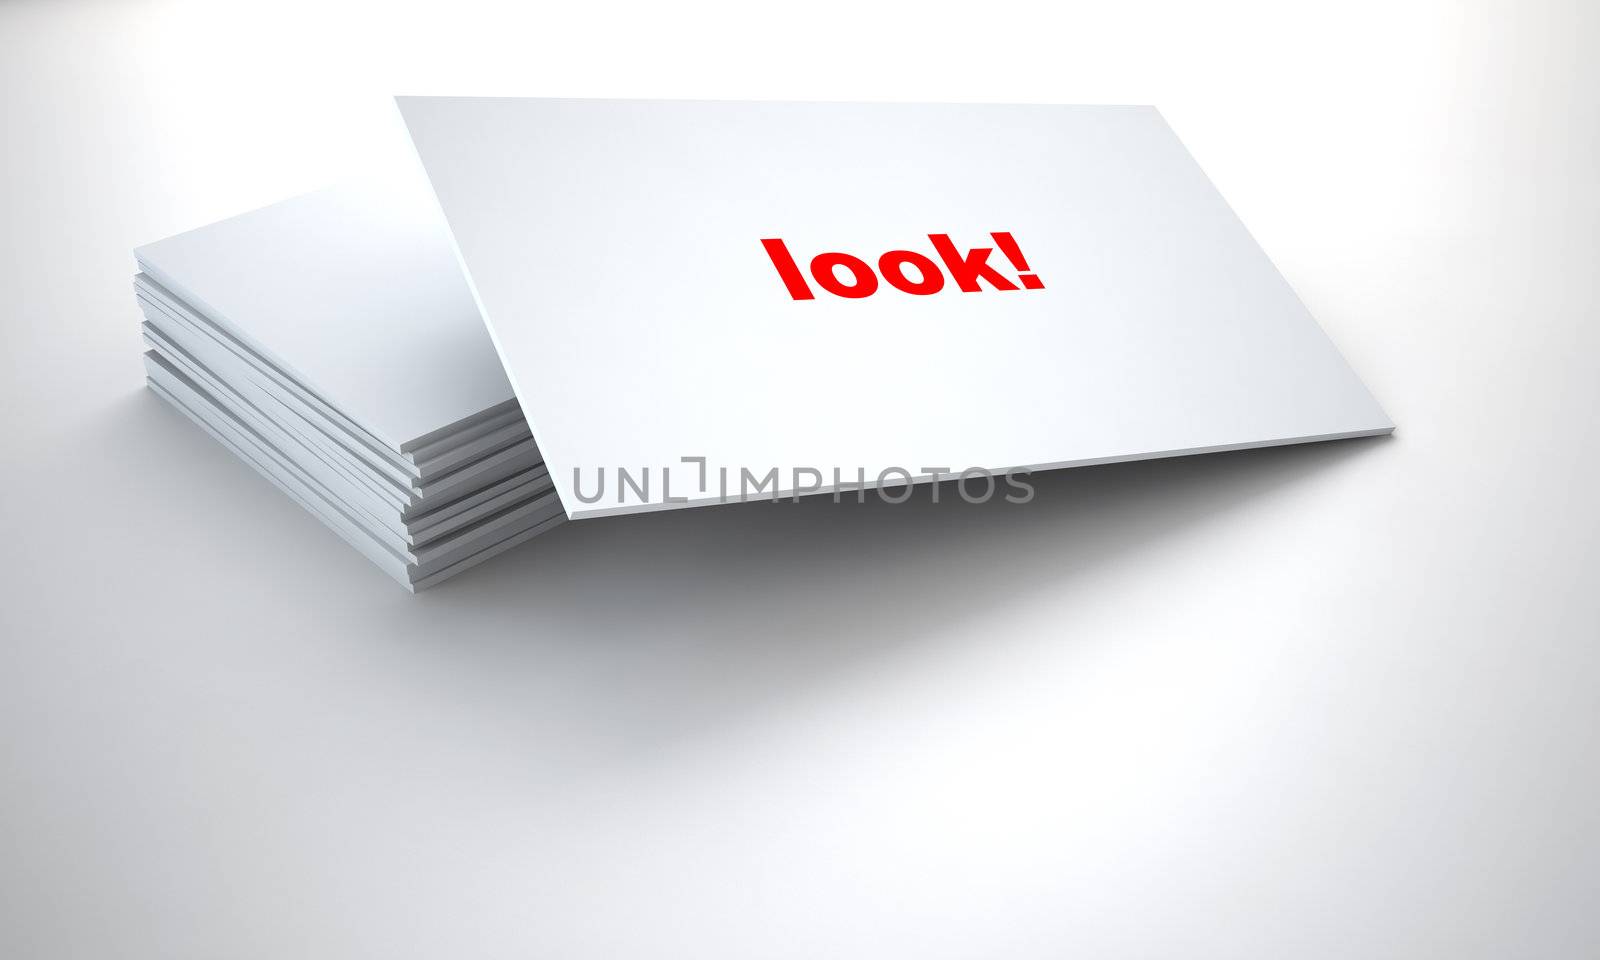 cardboard tablets with sign look on a white background